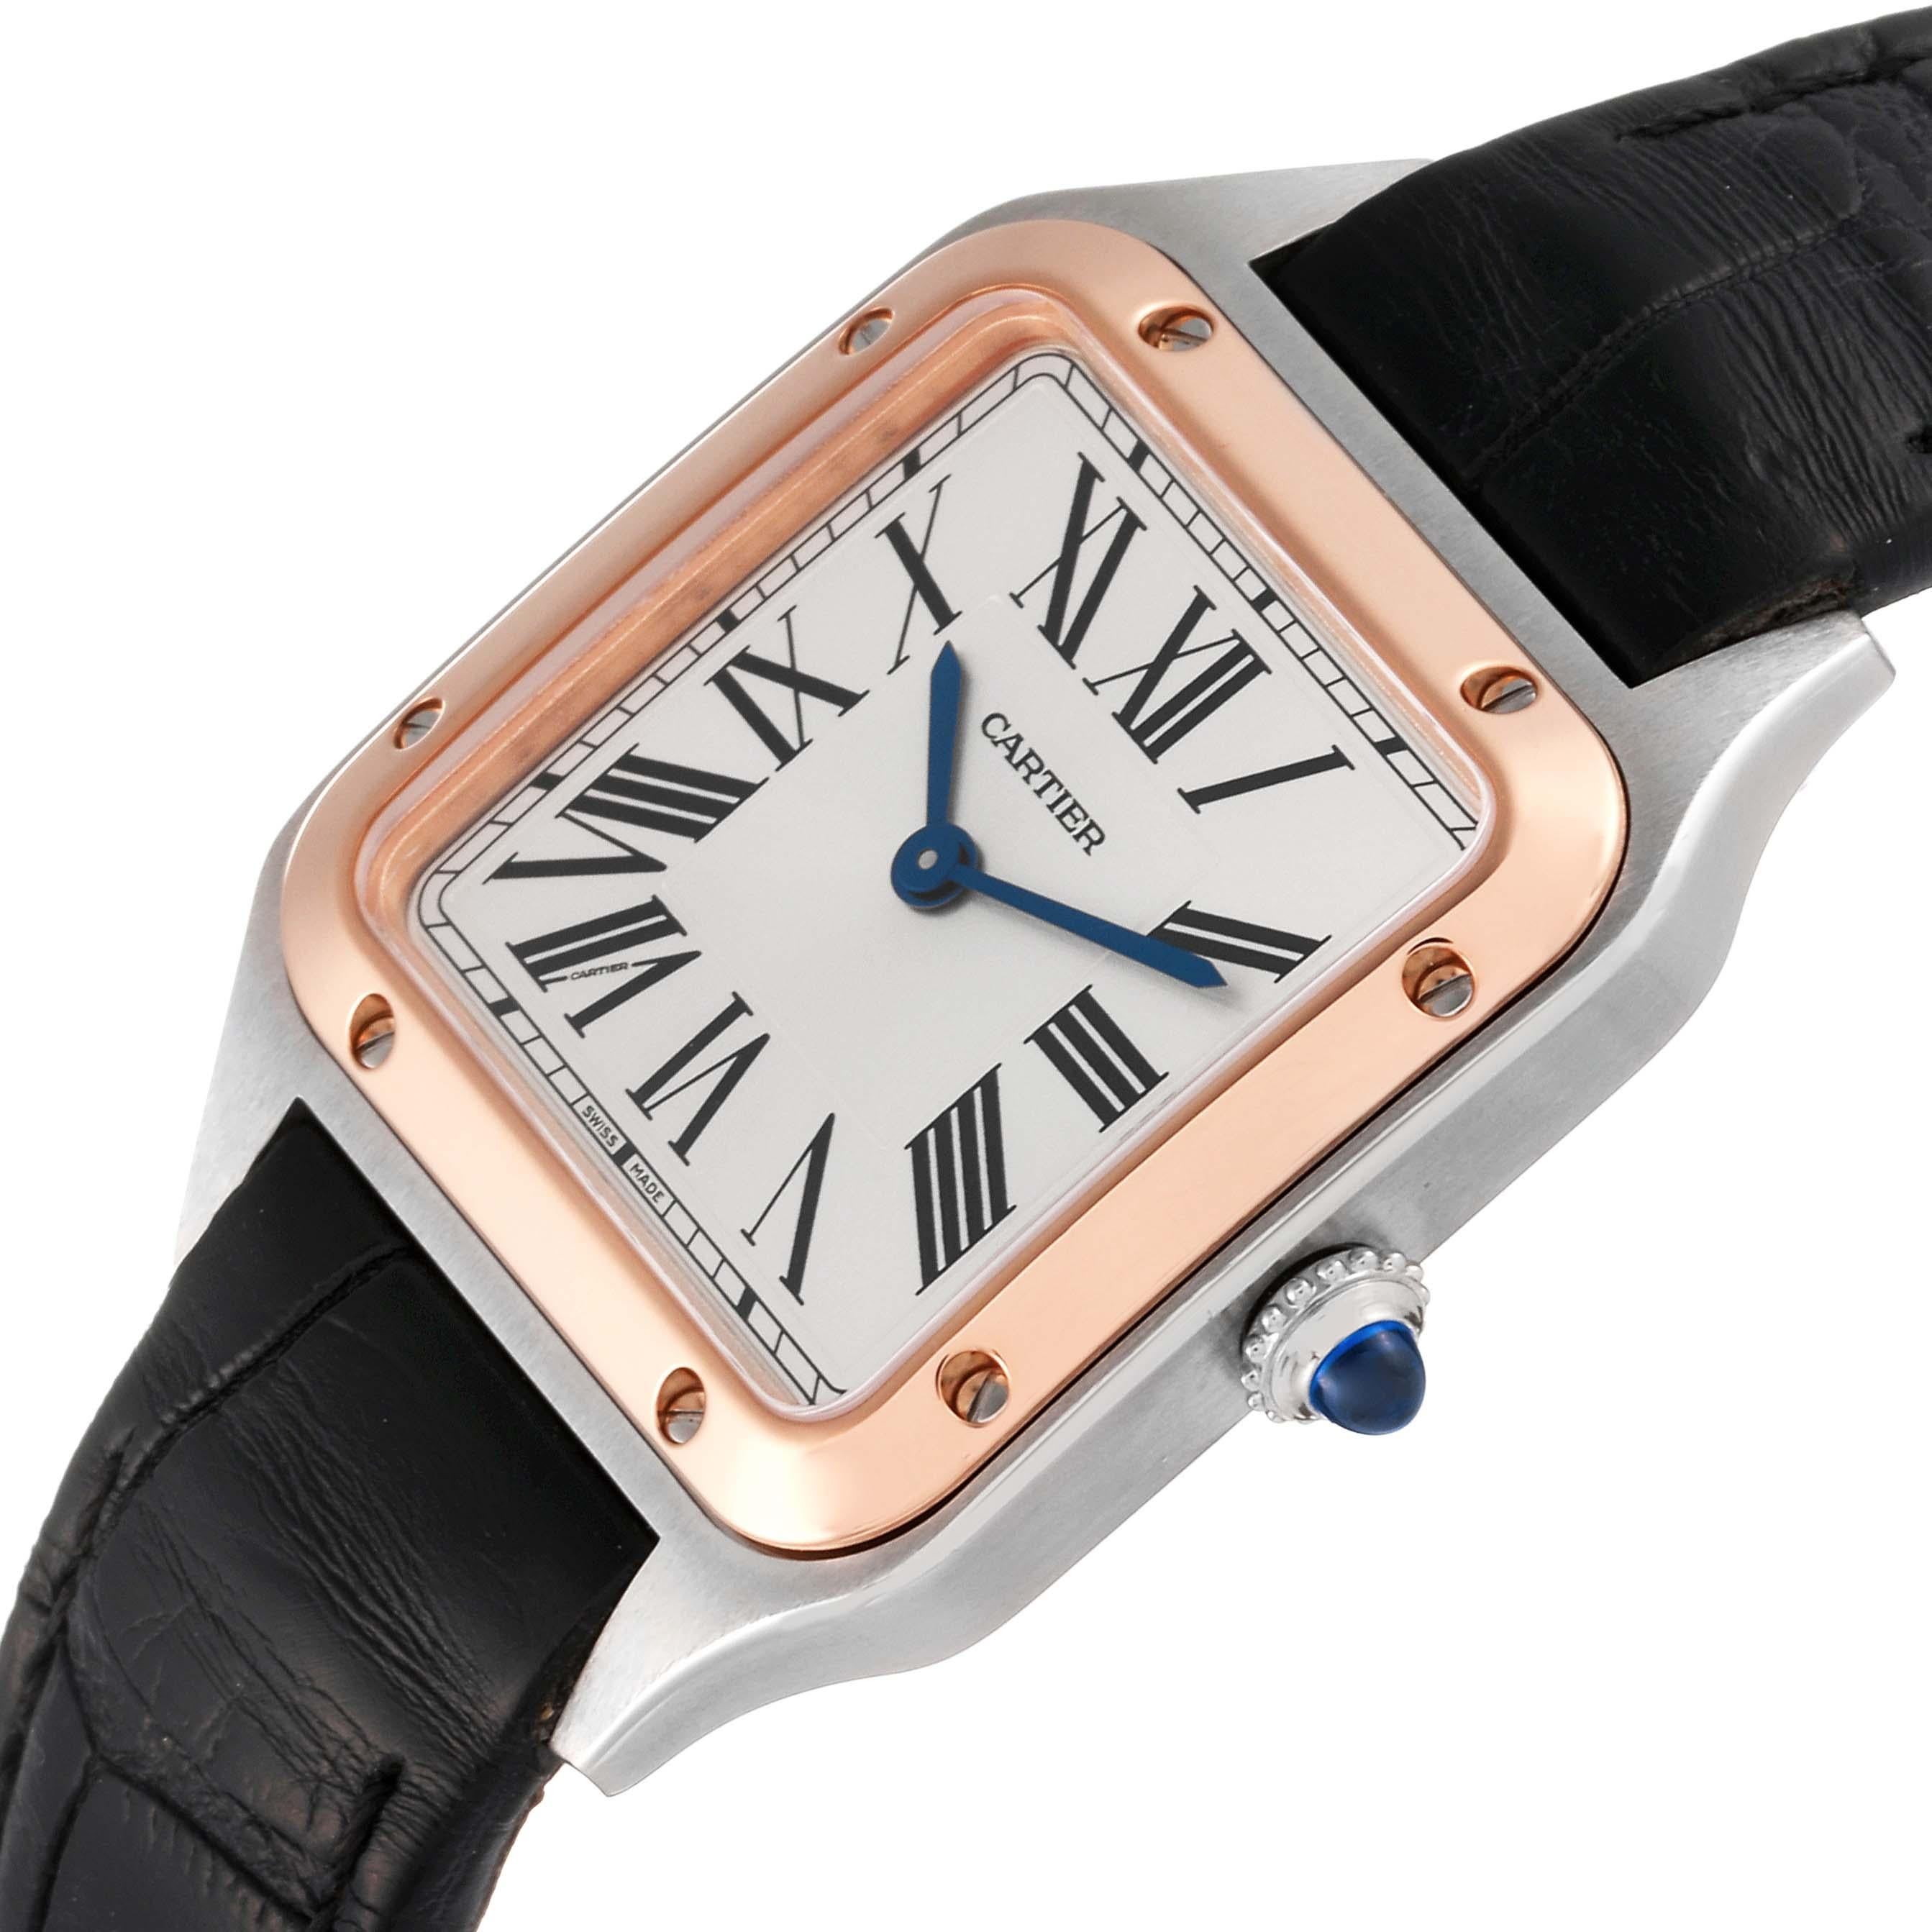 Cartier Santos Dumont Steel Rose Gold Silver Dial Ladies Watch W2SA0012. Quartz movement. Stainless steel case 38 mm x 27.5 mm. Case thickness 7.3 mm. Circular grained crown set with blue spinel cabochon. 18k rose gold bezel punctuated with 8